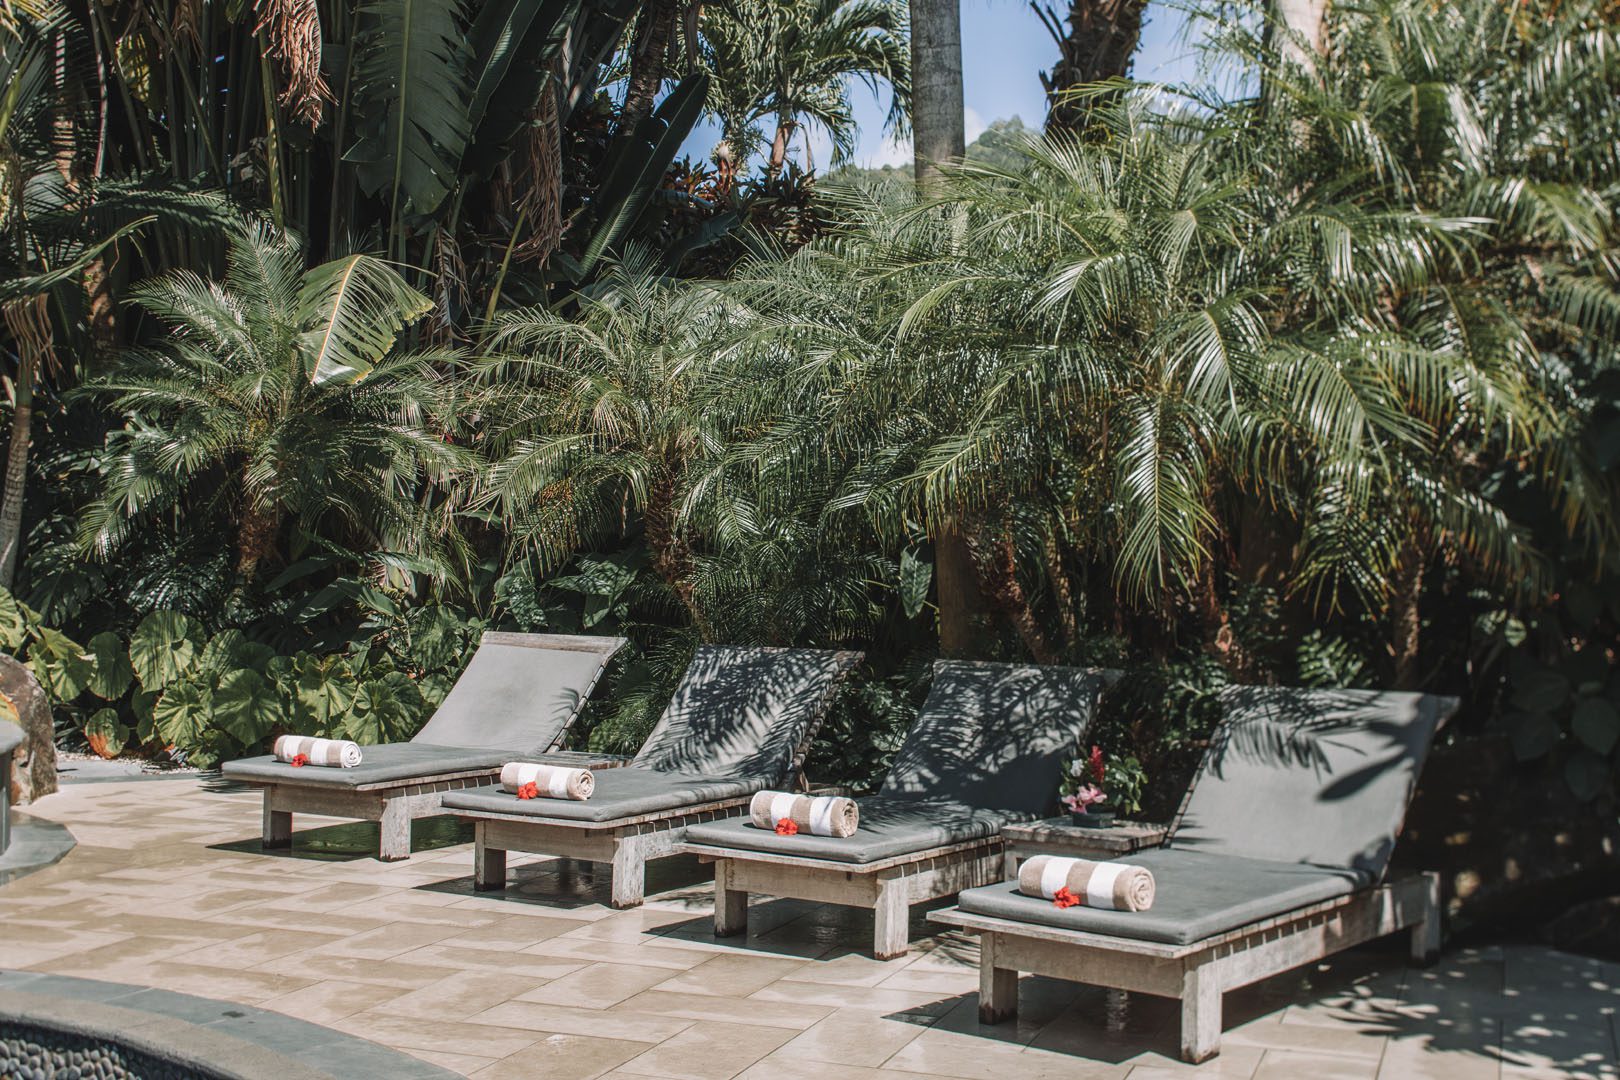 Image of the Resort swimming pool loungers beautifully lined up under shady-trimmed palm trees featuring pool towels neatly rolled up with a red hibiscus flower on each lounge